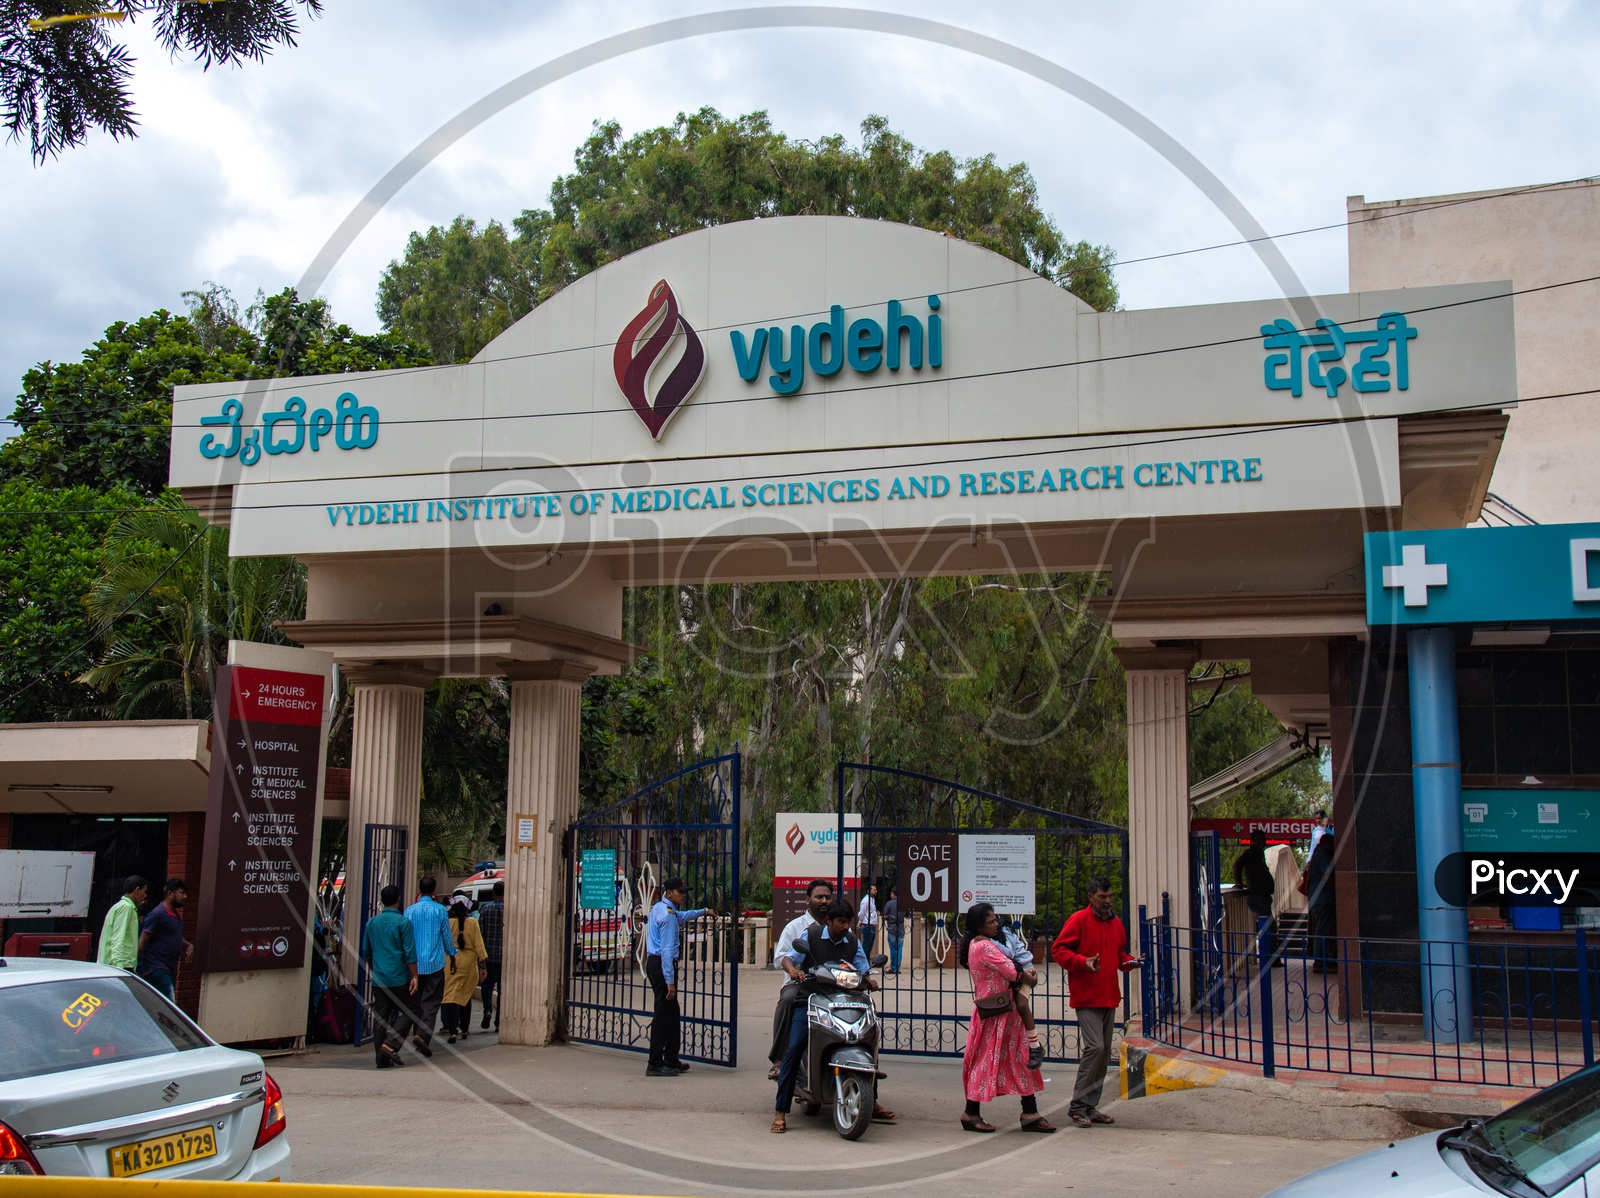 Vydehi Institute of Medical Sciences and Research